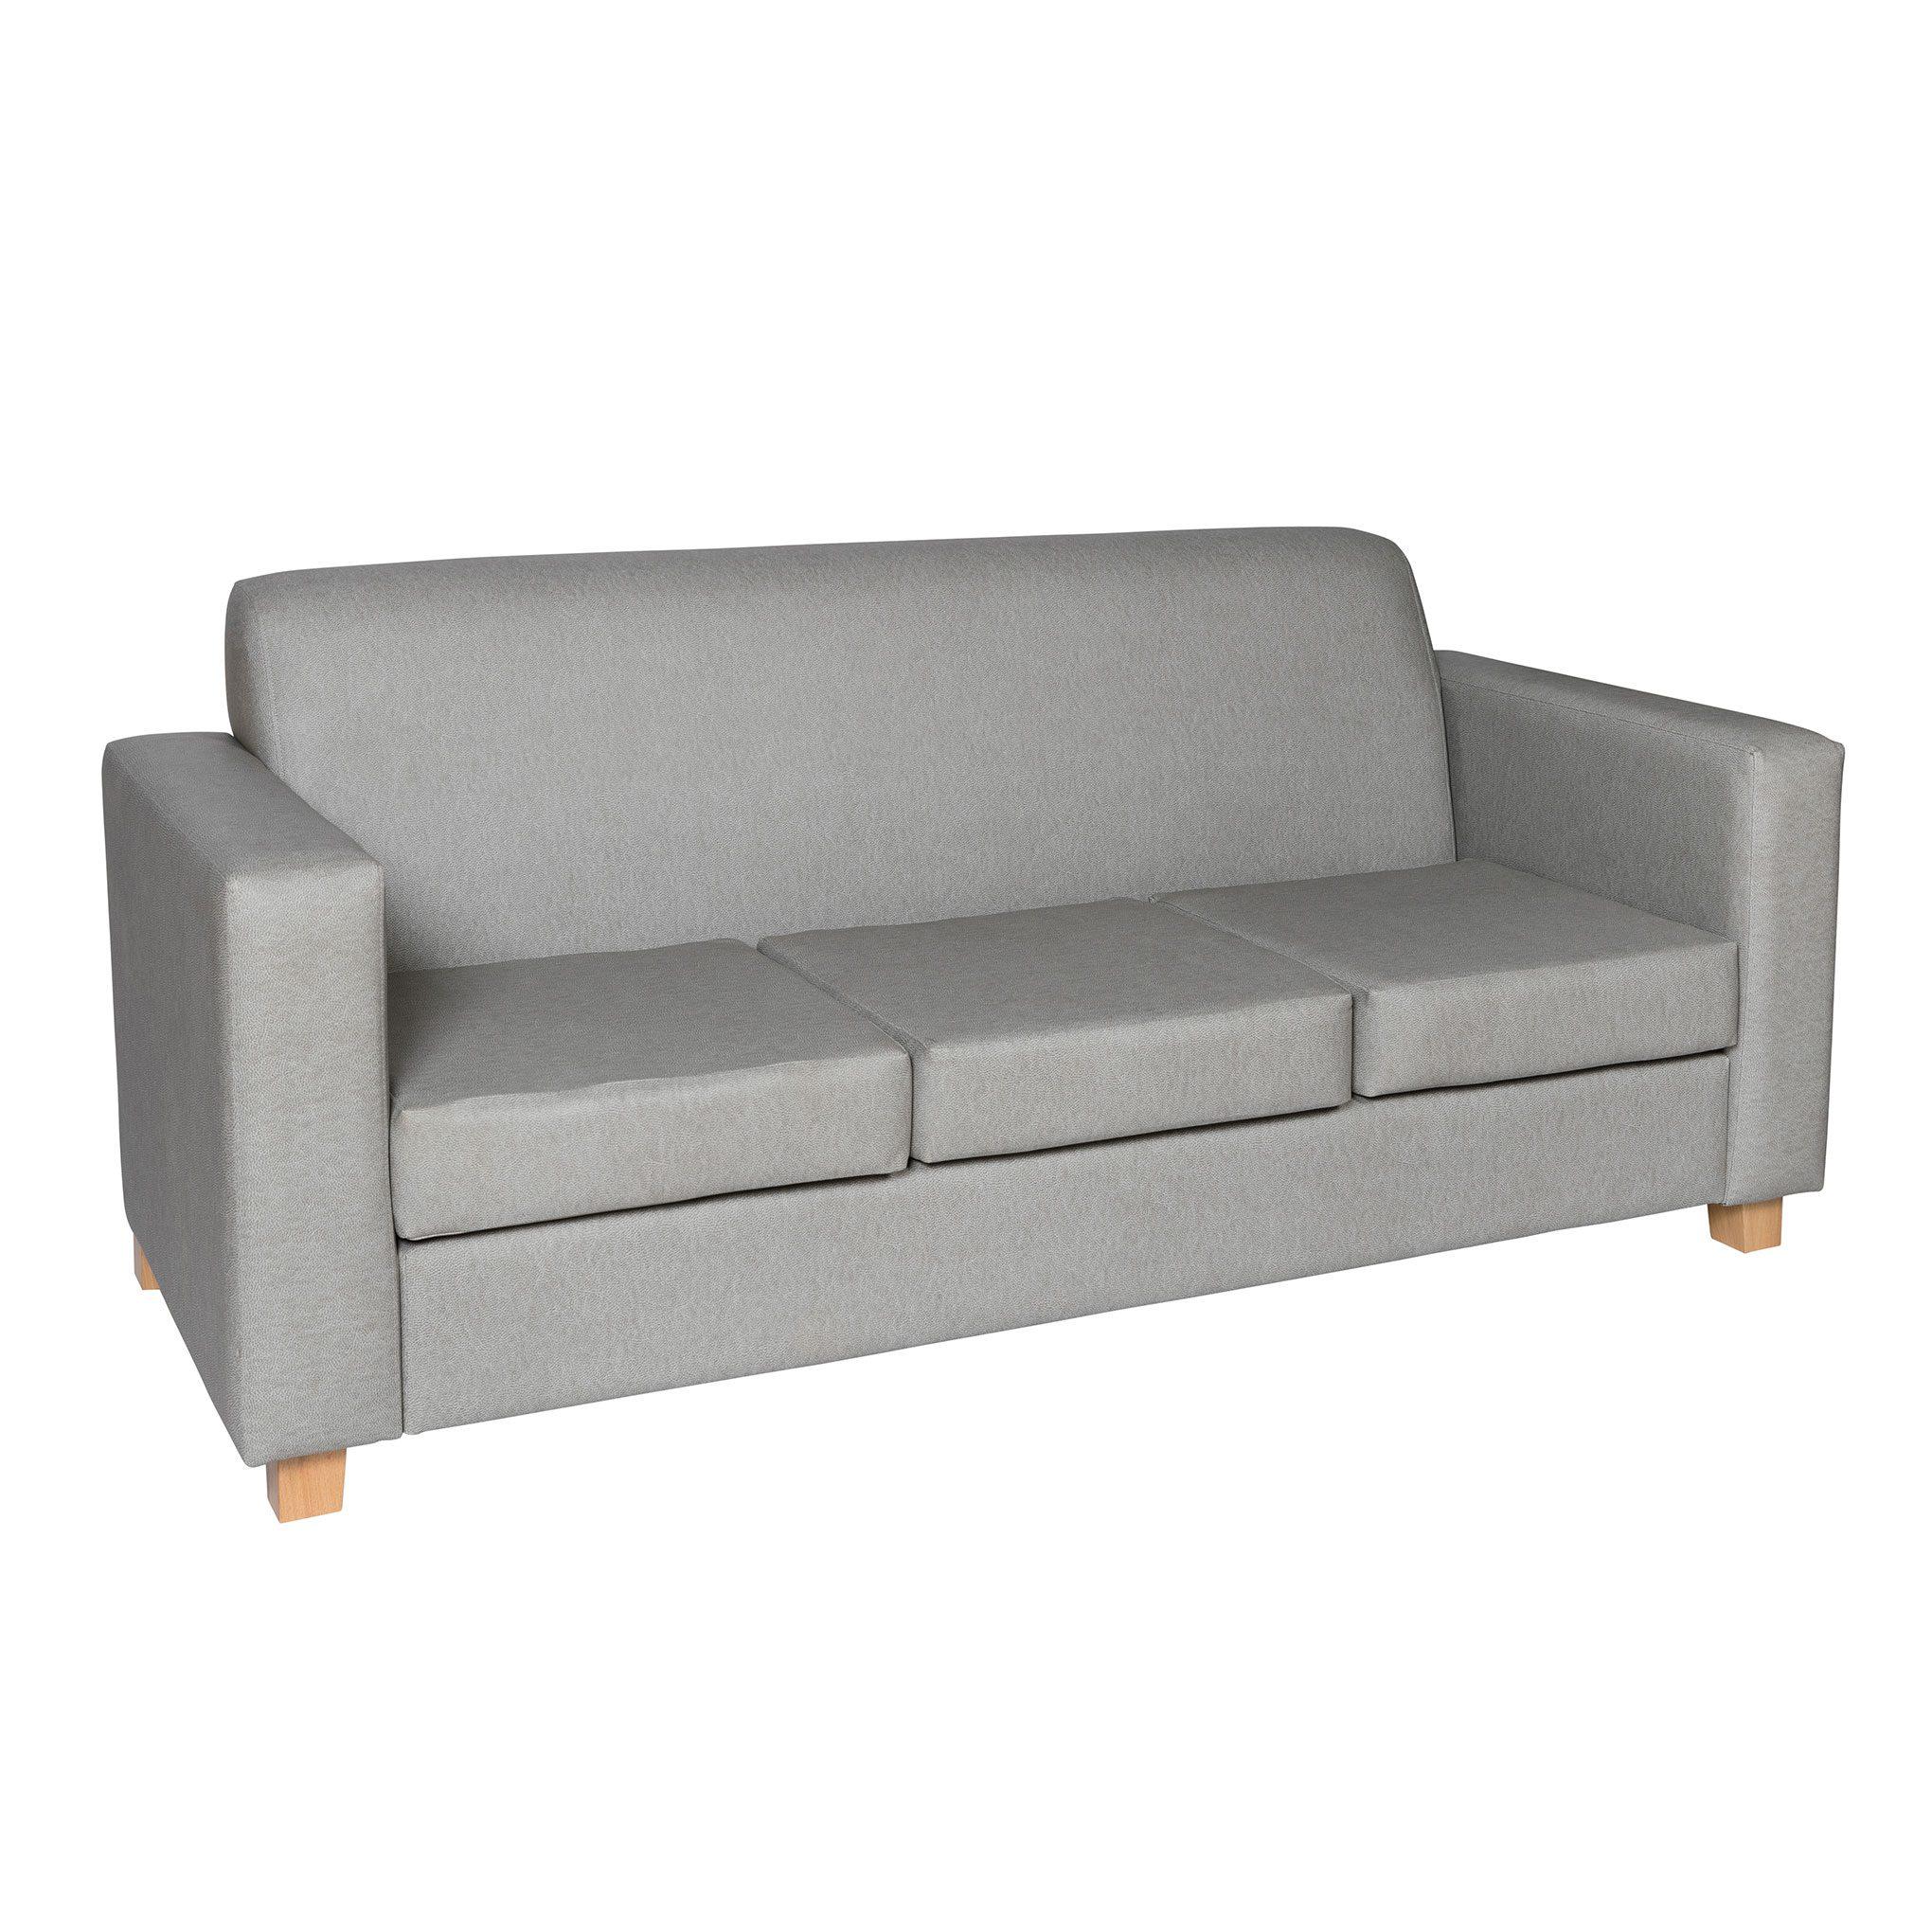 Arden 3 Seater with Standard Arm